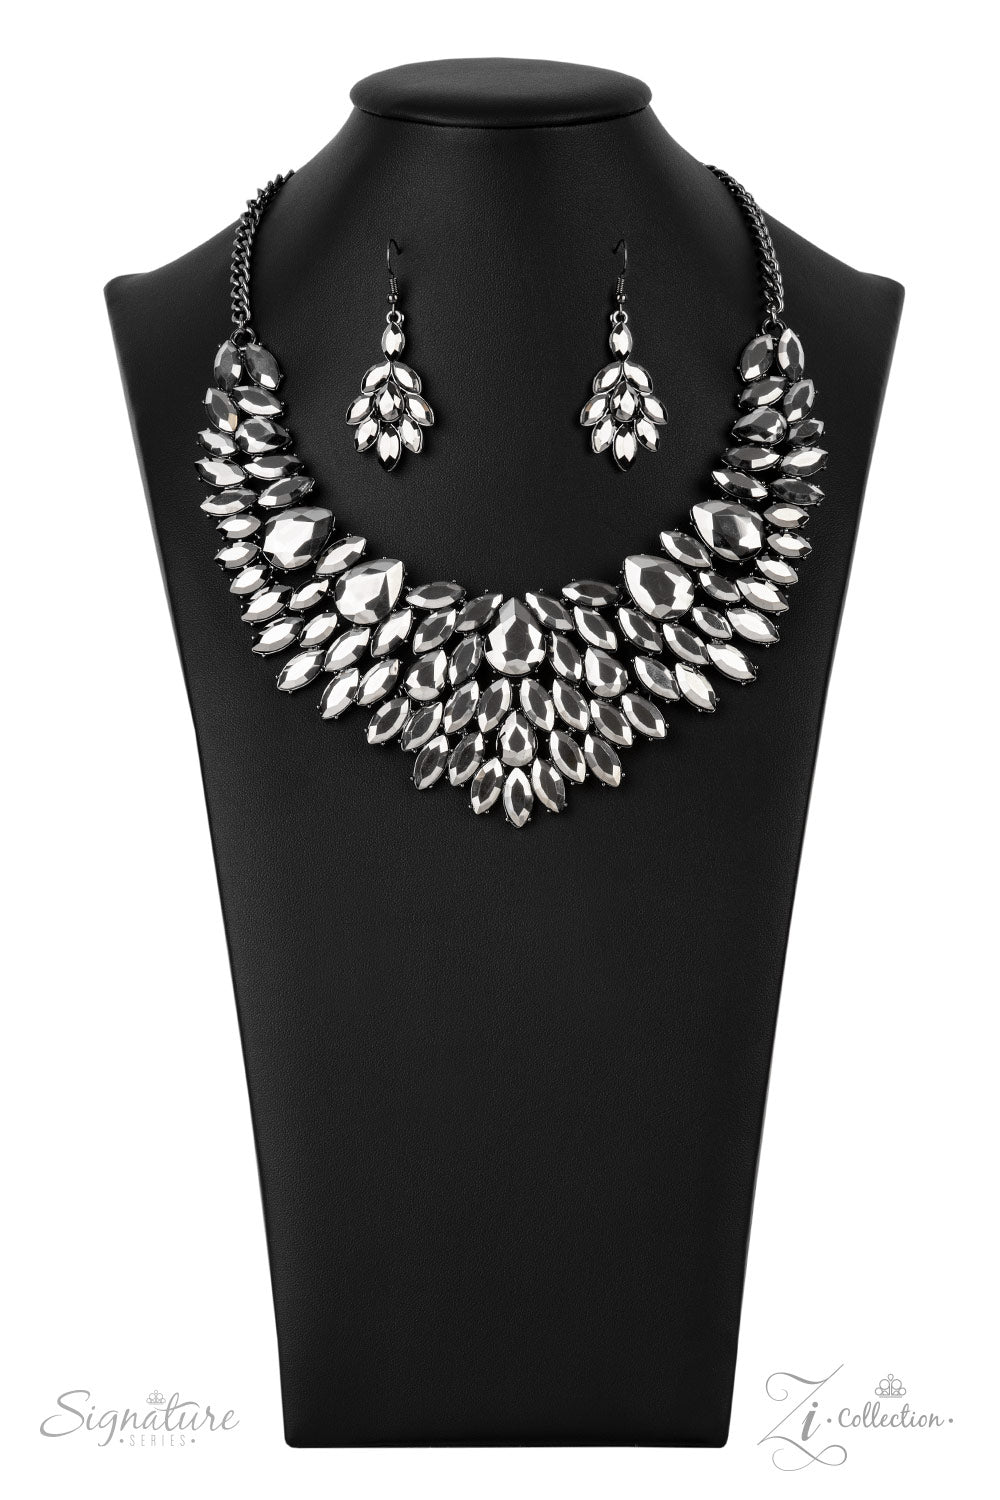 The Tanisha - 2021 Zi Collection Necklace smoldering collection of oversized teardrop and marquise cut hematite rhinestones daringly fan out from the collar, coalescing into intense interconnected frames. The dauntless display of dazzle locks in place, creating a stunningly solitaire sparkle. Features an adjustable clasp closure.  Named after the 2021 Seize the Spotlight winner, Tanisha F.  Sold as one individual necklace. Includes one pair of matching earrings.